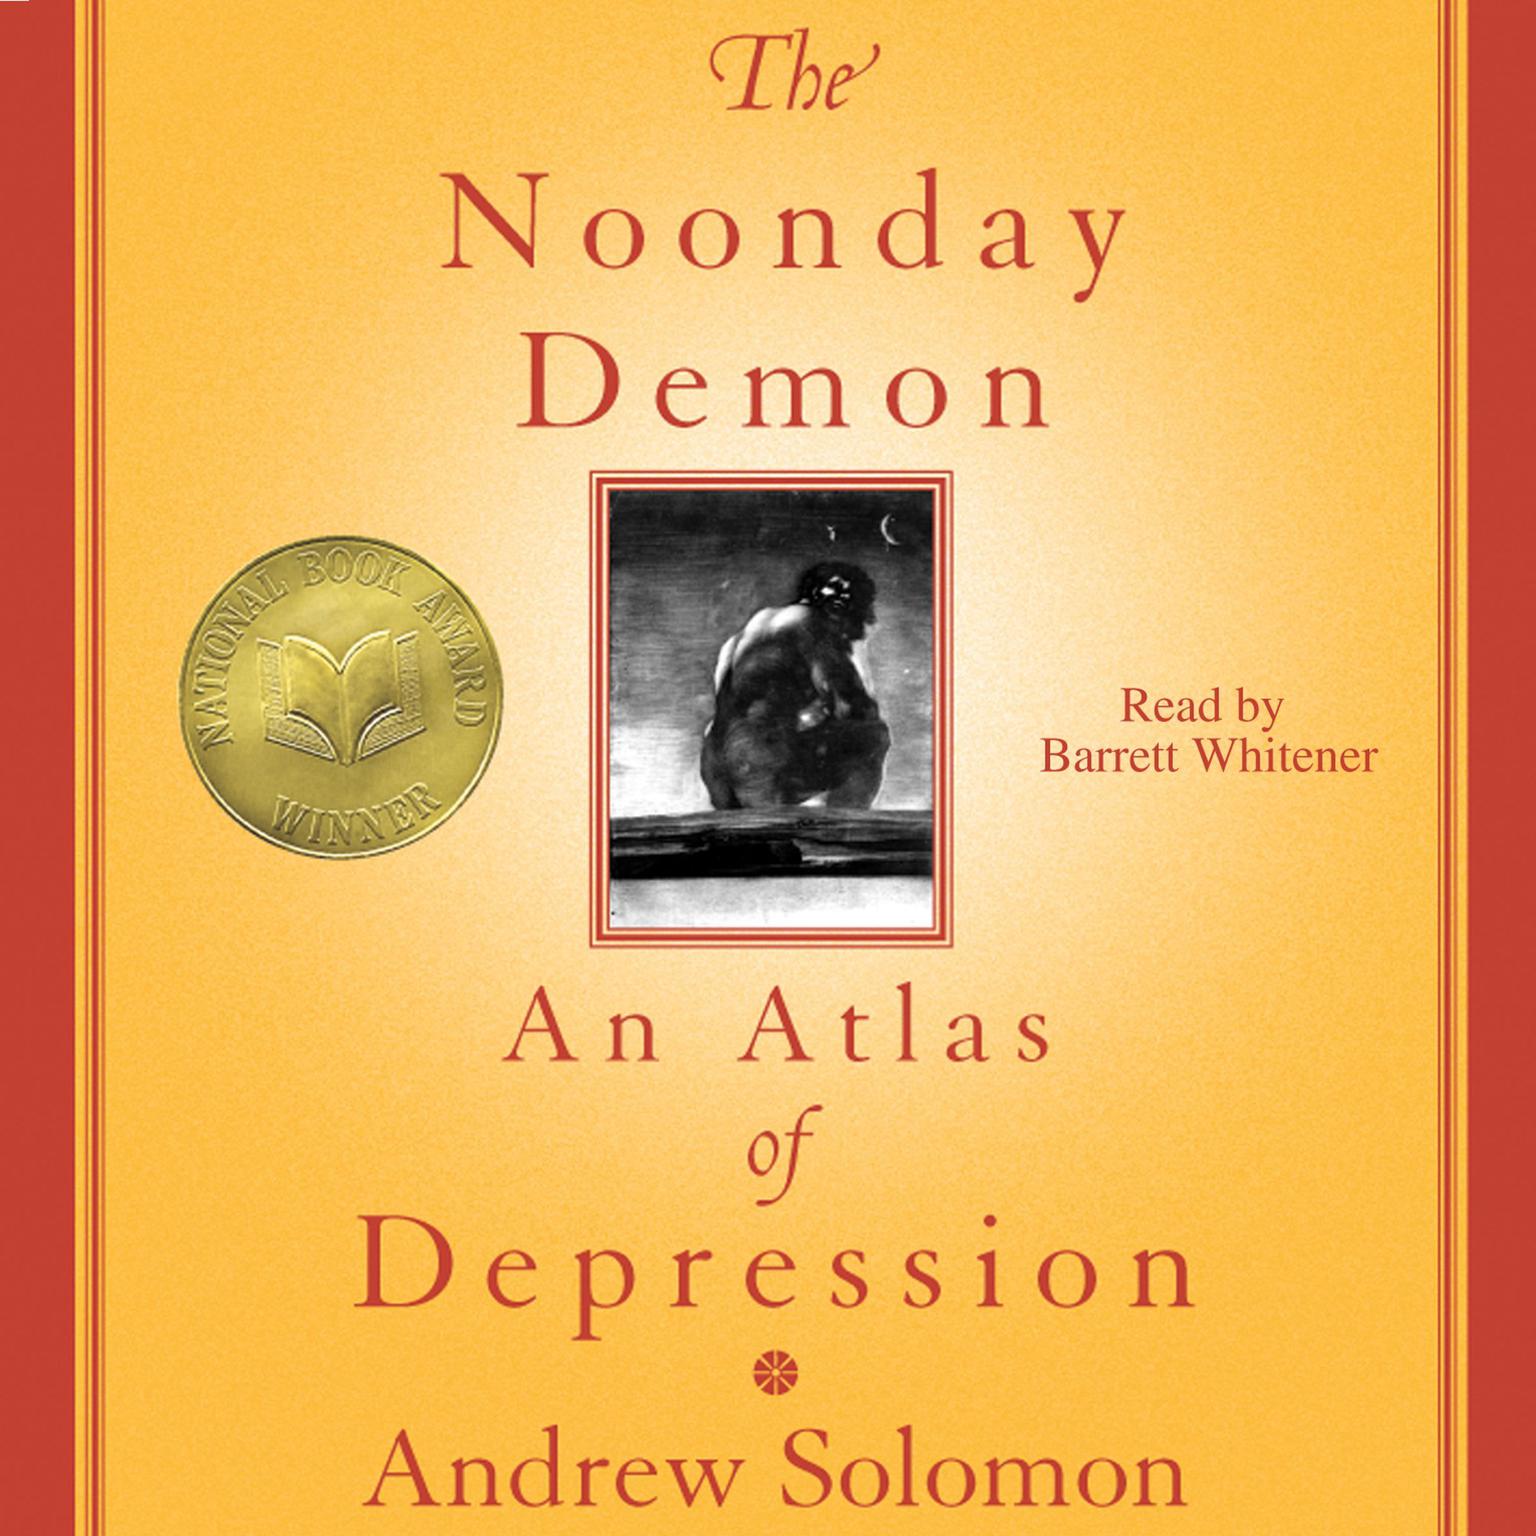 The Noonday Demon: An Atlas Of Depression Audiobook, by Andrew Solomon